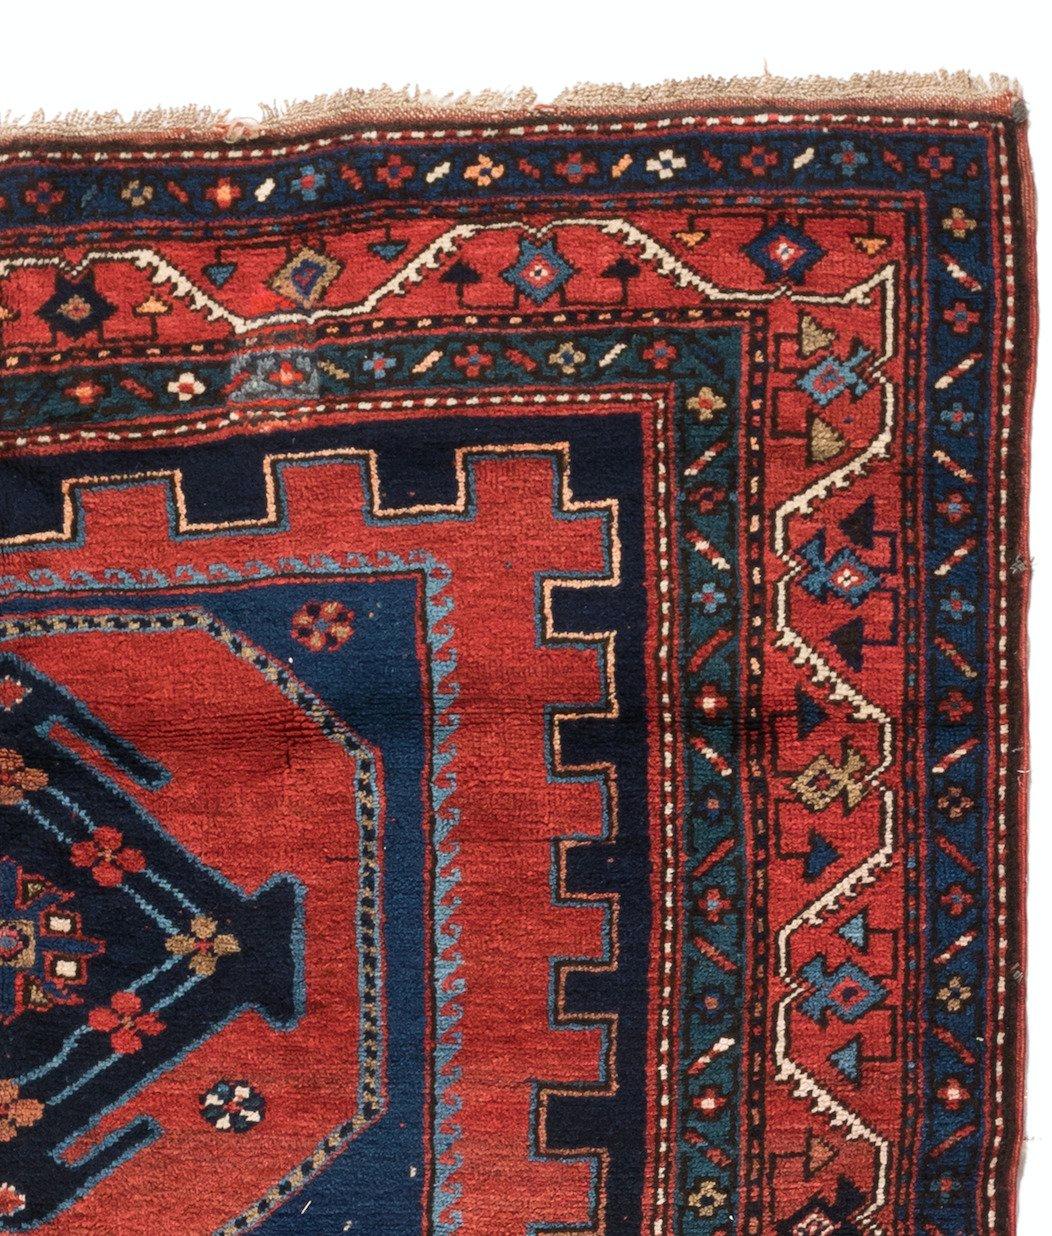 This lovely antique Caucasian Kazak carpet measures 4.7 x 7 ft and is from the 1930s.

 